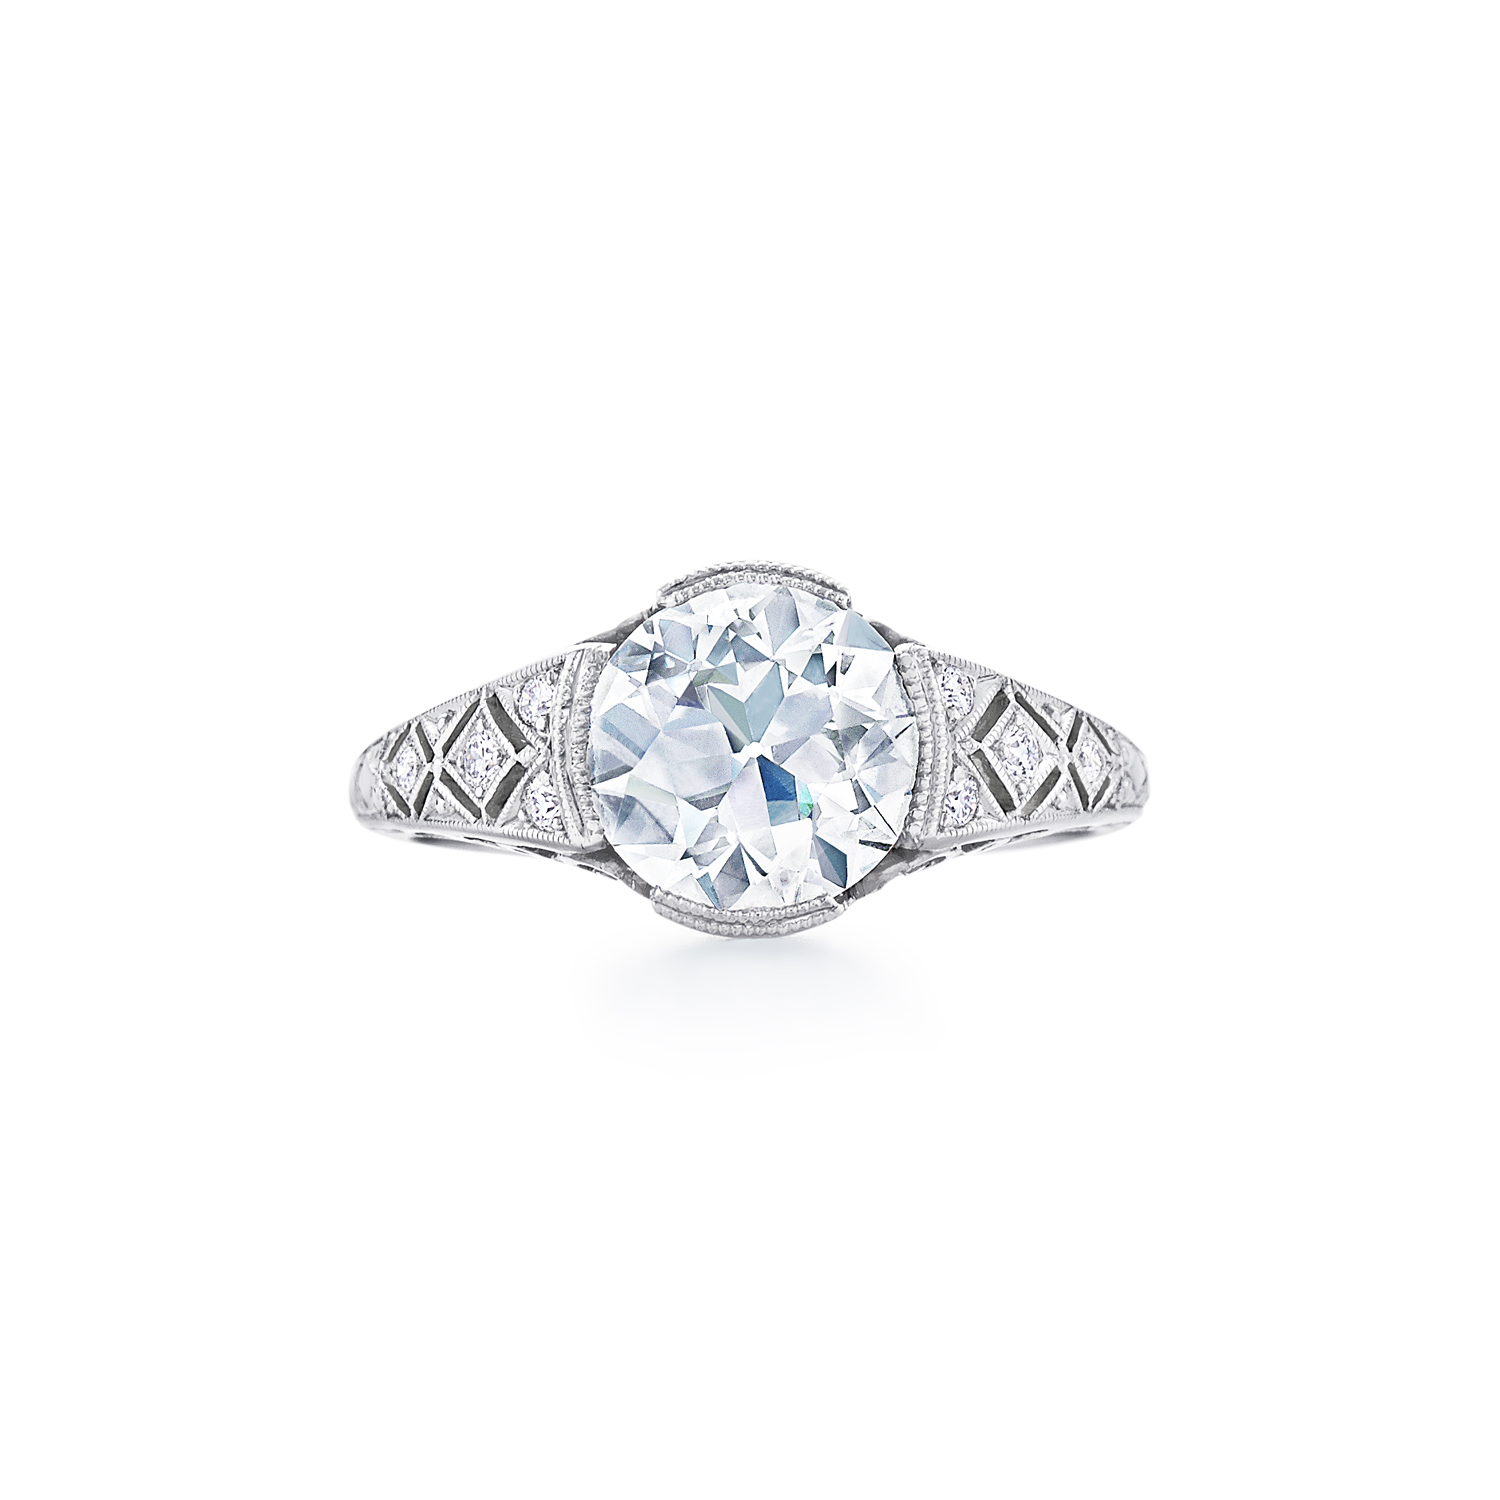 Fred Leighton Round Diamond Engagement Ring with Crosshatch Filigree in Platinum, Style F-1009FLOE-0-DIA-PLAT